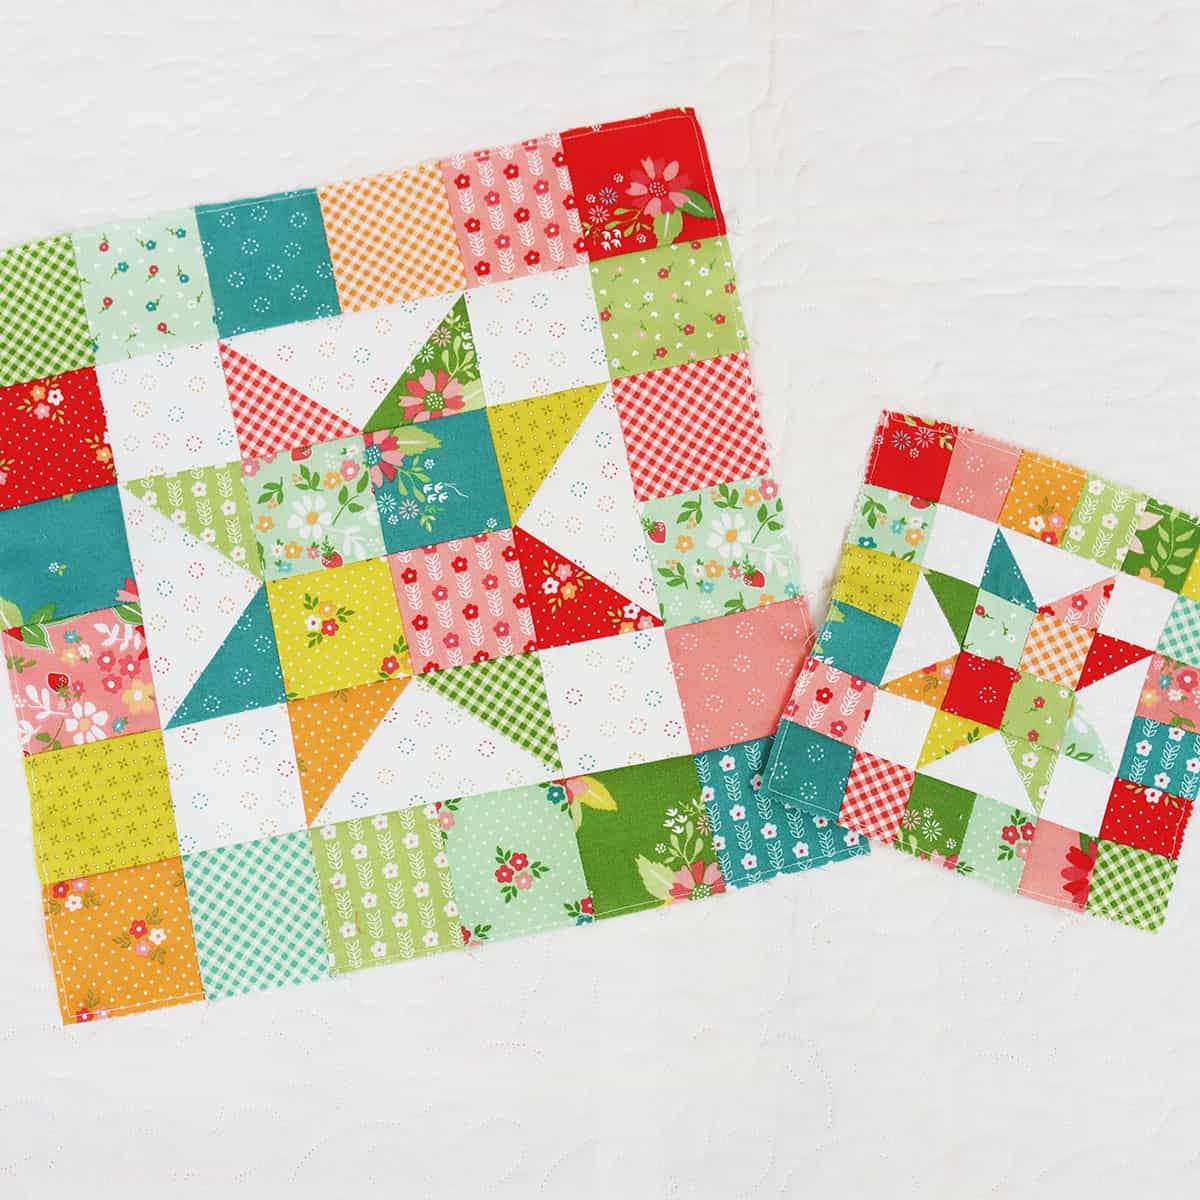 Scrappy patchwork star quilt blocks in green, aqua, teal, orange, pink, red, and green fabrics